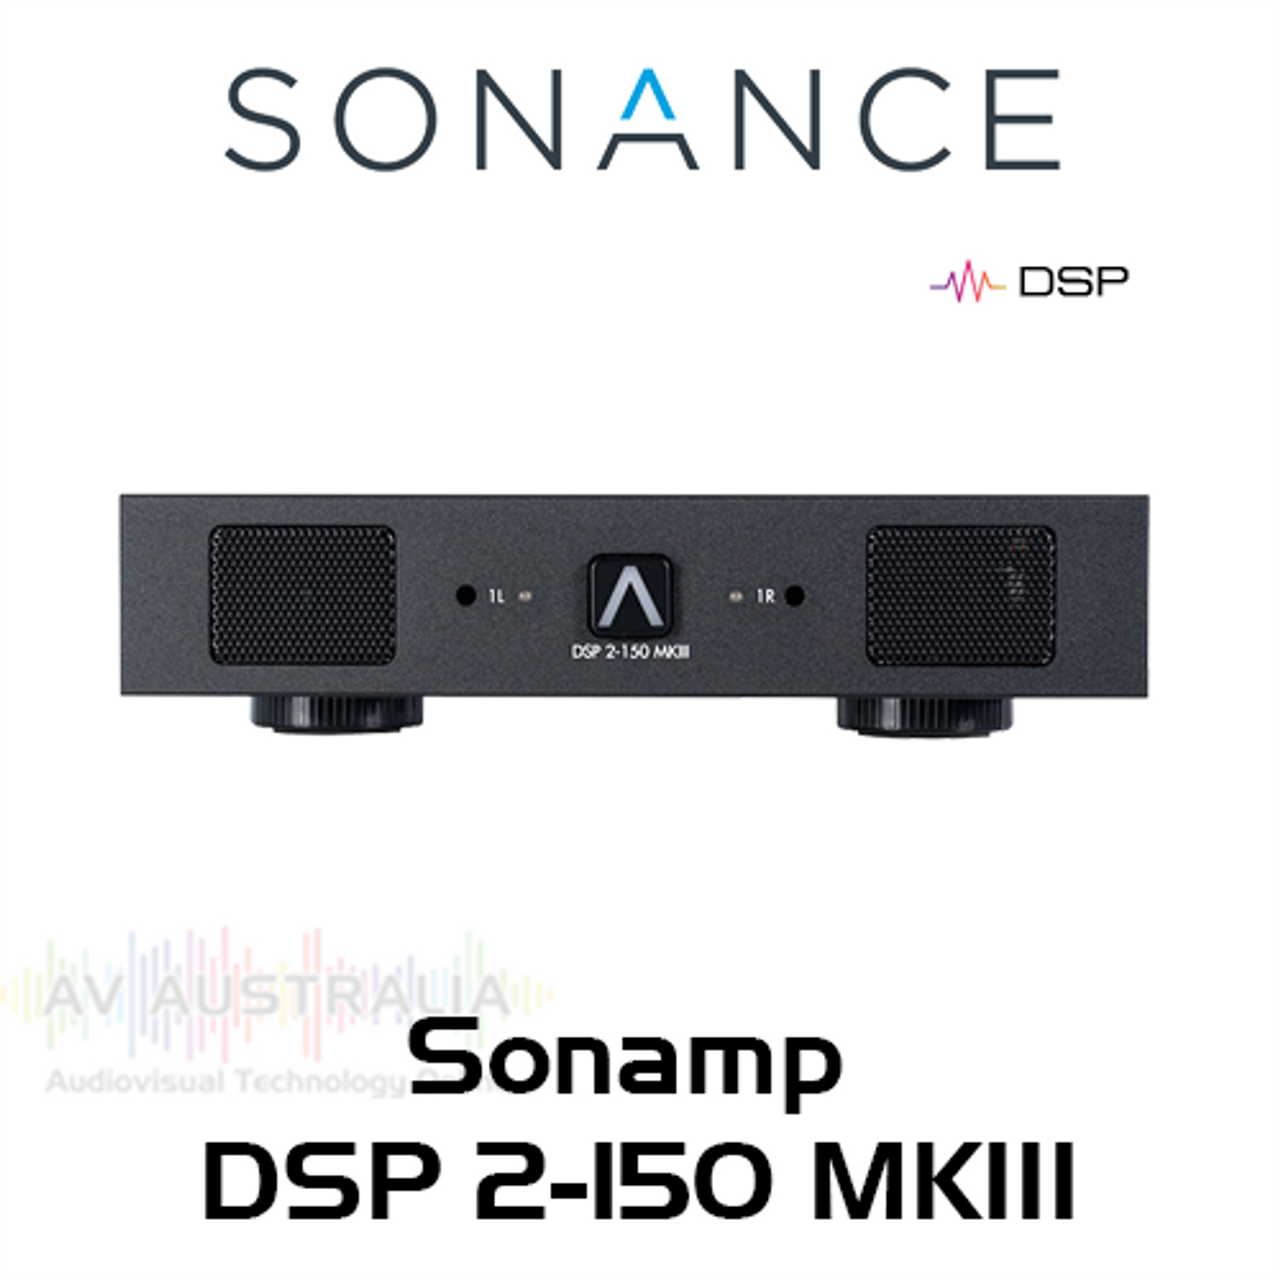 Sonance Sonamp DSP 2-150MKIII 2-Ch 150W Power Amplifier with DSP